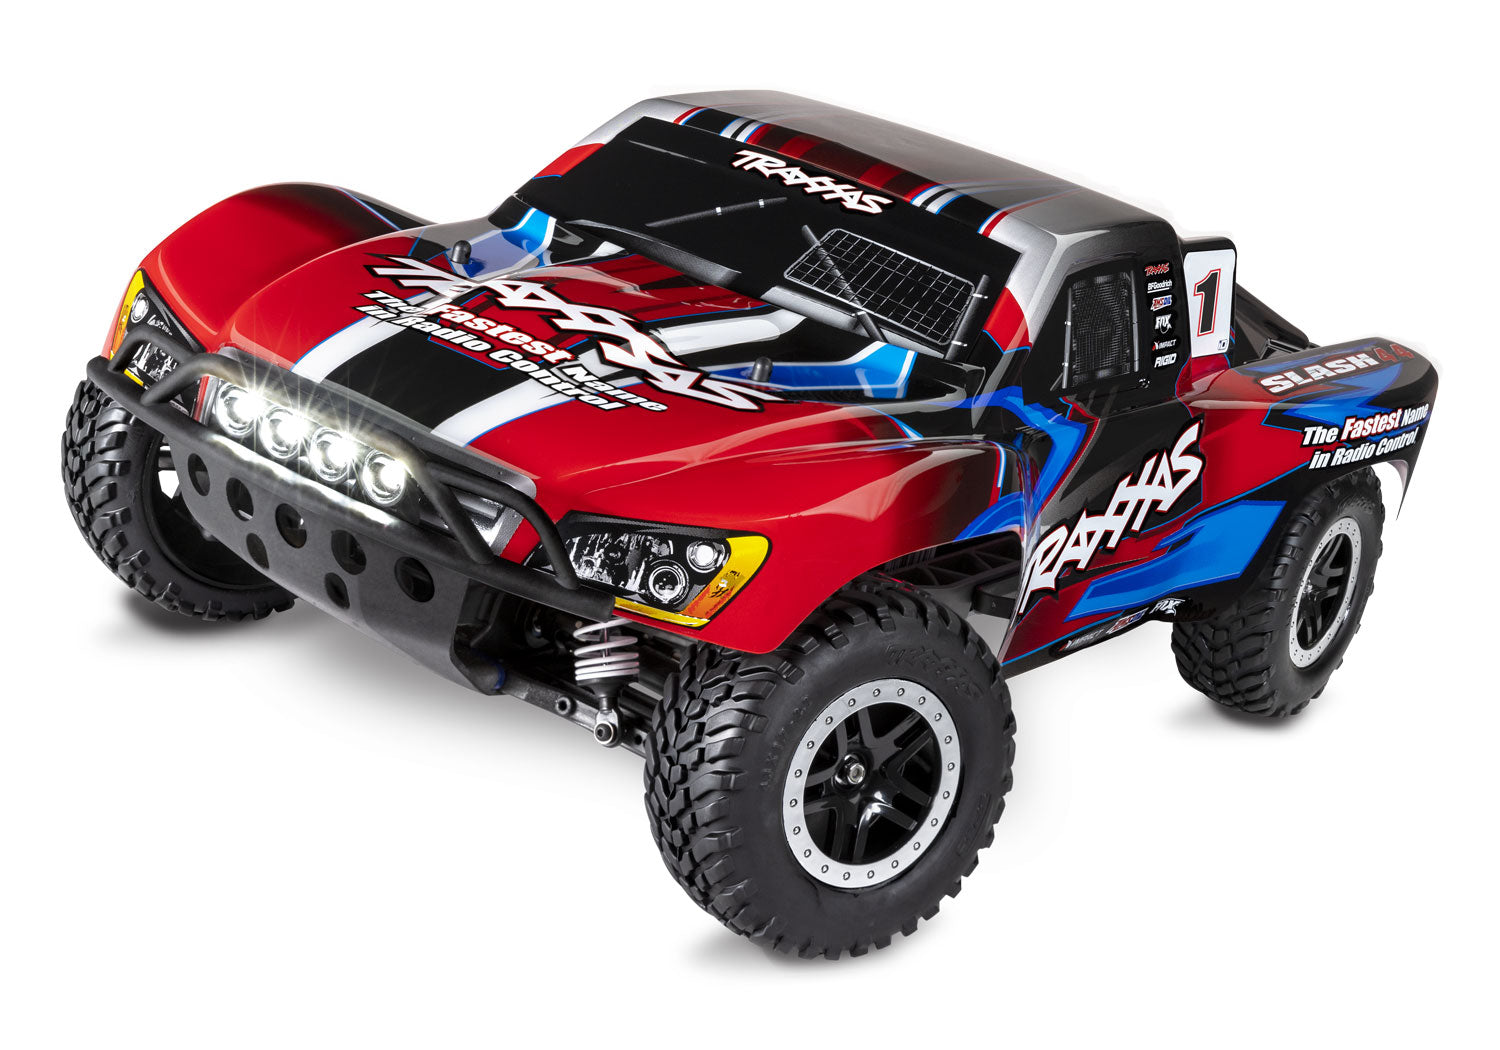 TRAXXAS 68054-61 Slash 4X4 1/10 scale waterproof short course truck. RTR, with TQ™ 2.4GHz radio system, XL-5® Electronic Speed Control, 8.4V NiMH 3000 mAh battery, 4-amp DC Charger, LED lighting, and painted body.